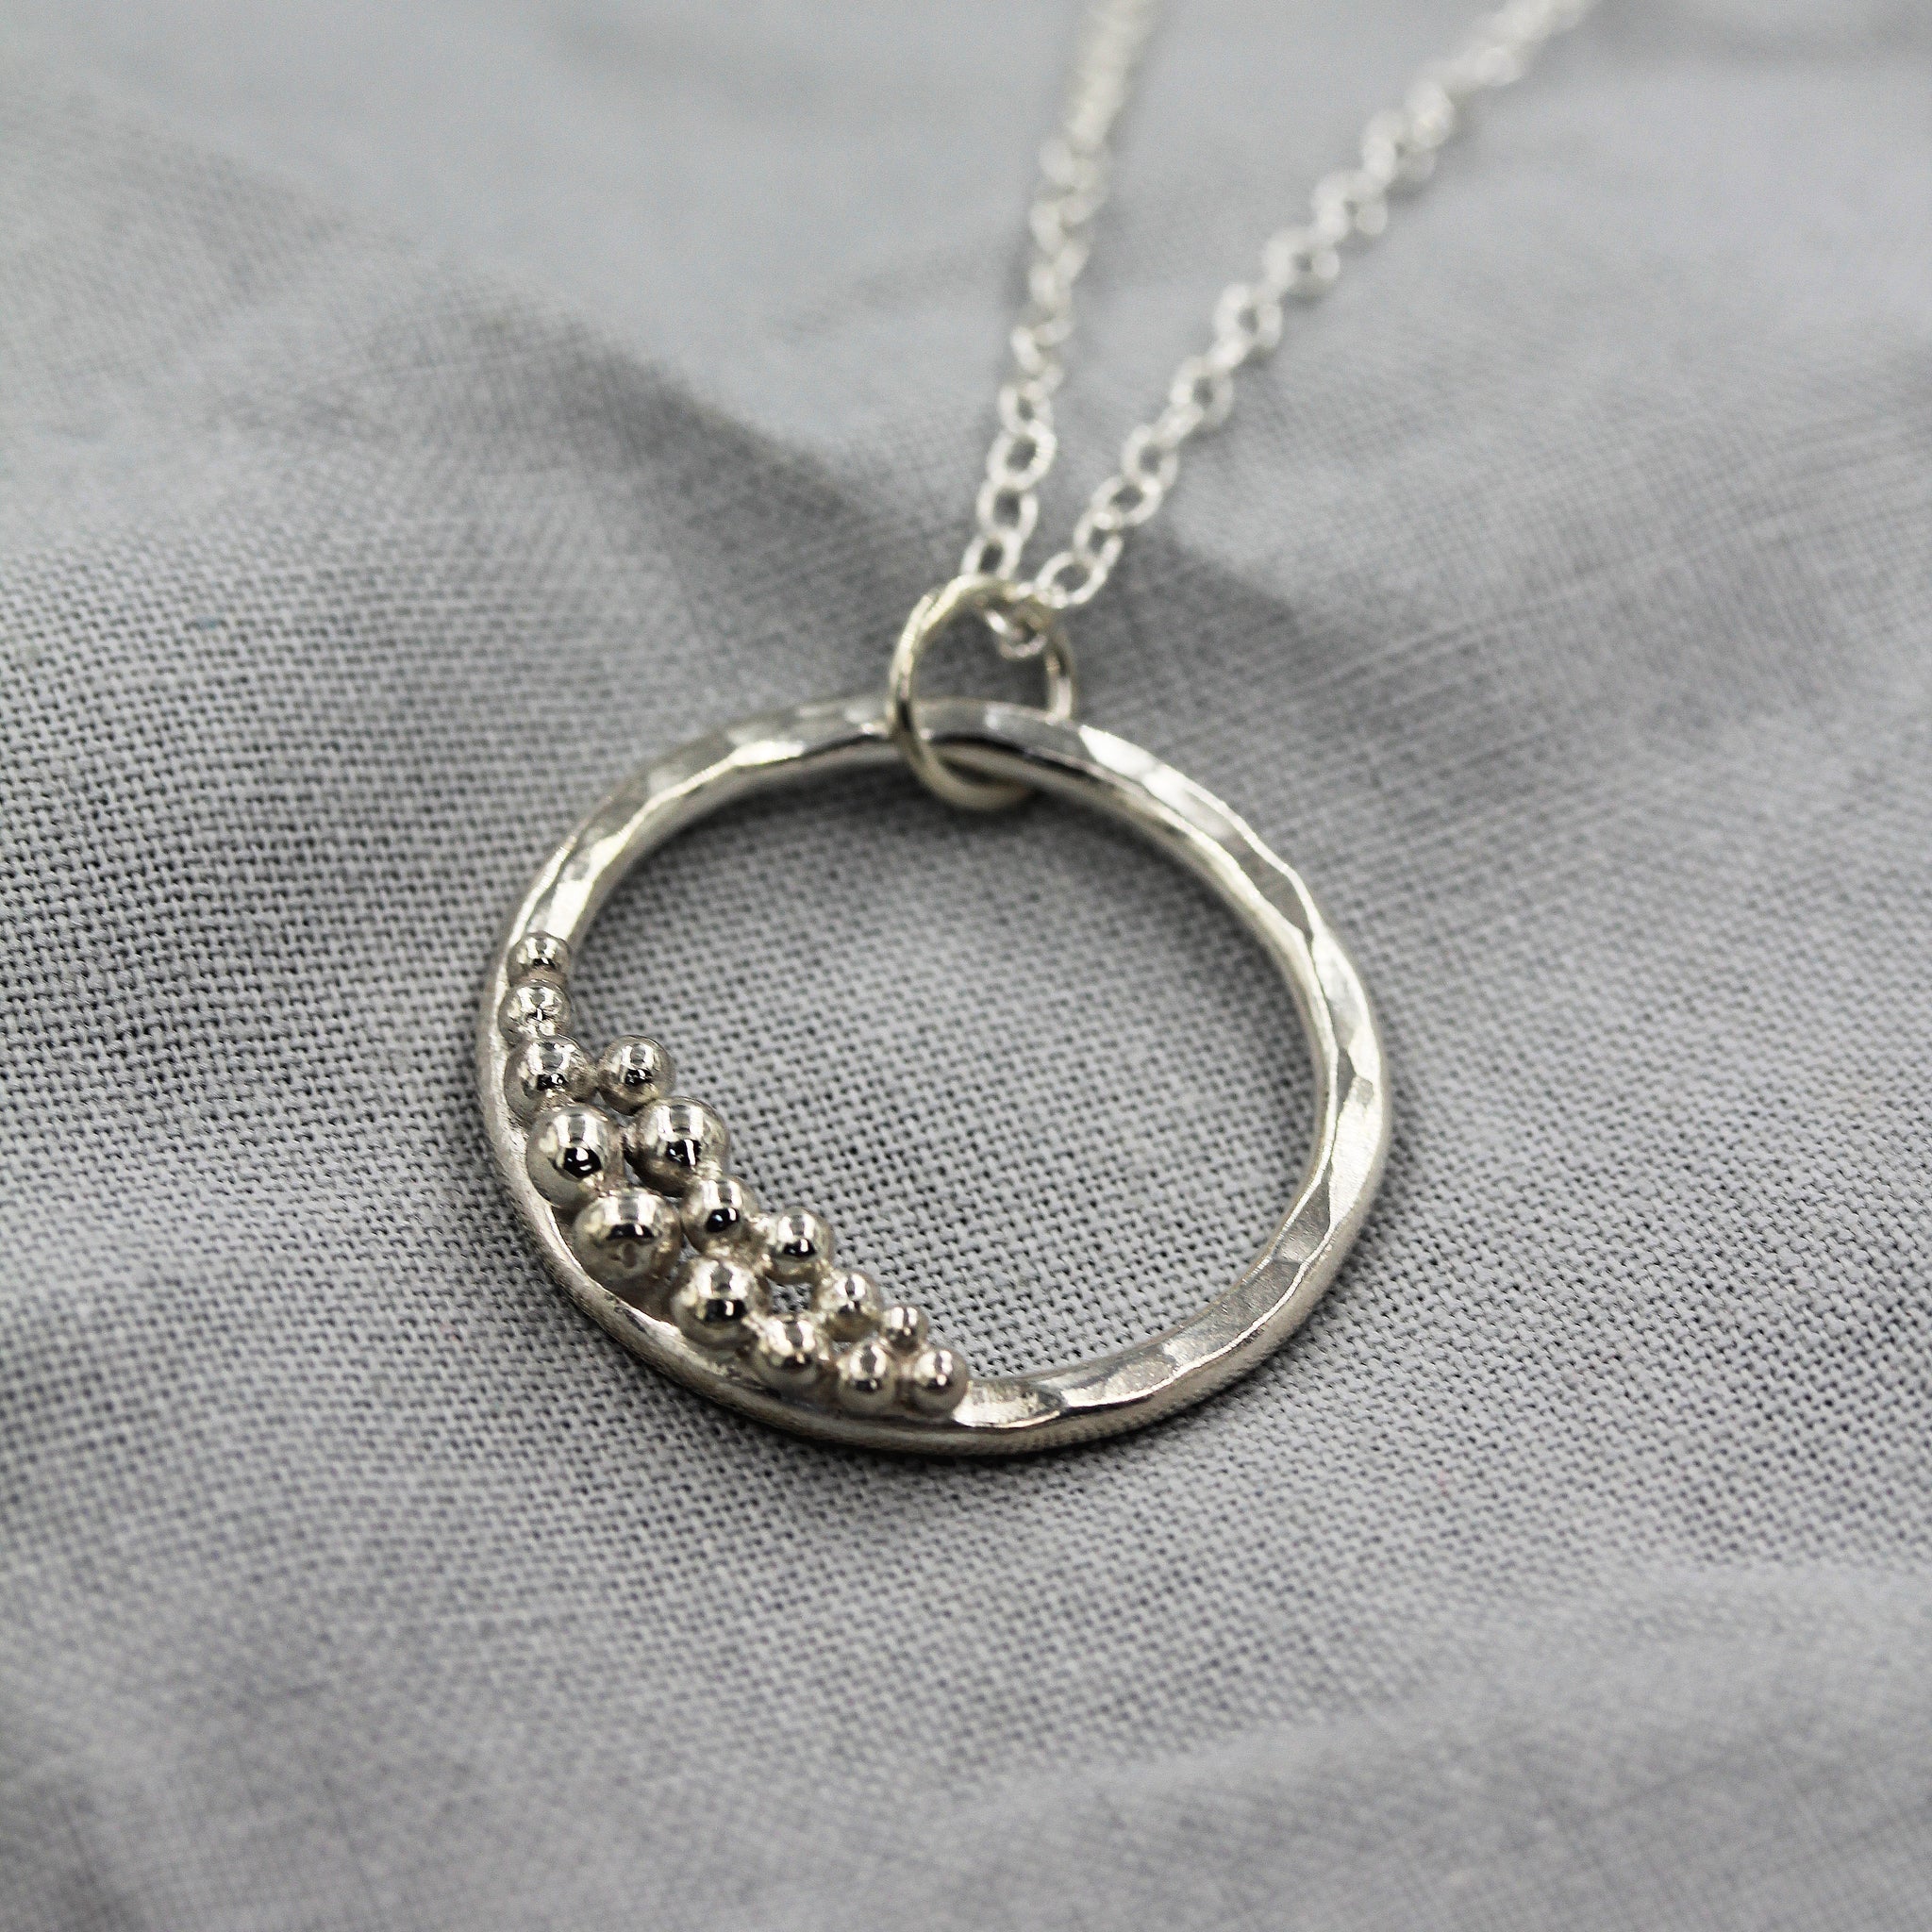 Sea inspired necklace handmade in 100% recycled sterling silver by  Gemma Tremayne Jewellery